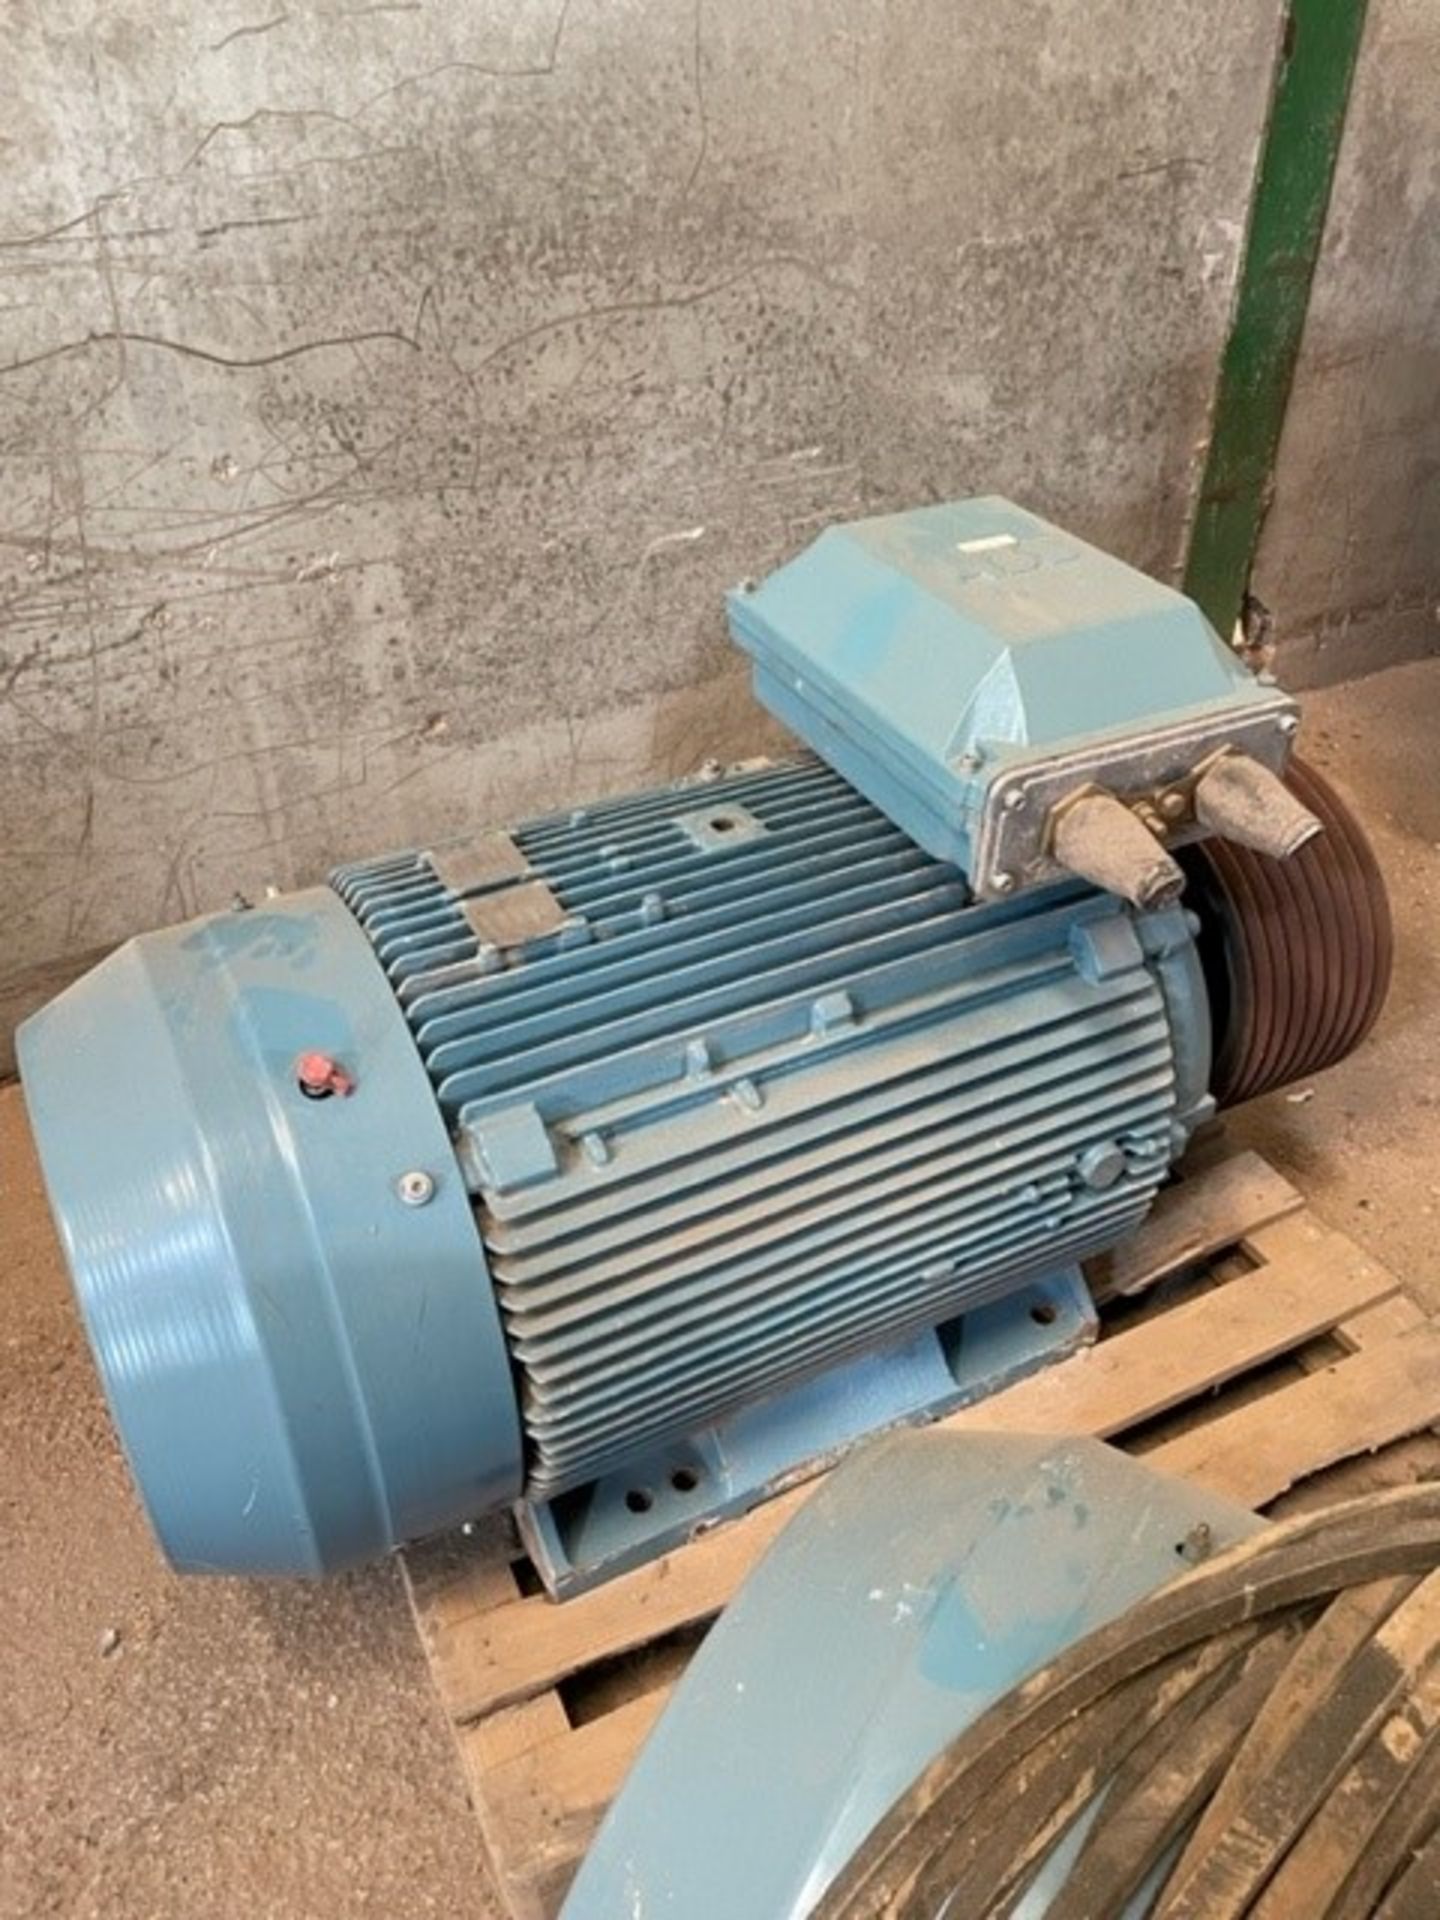 ABB Foot Mounted TEFC Electric Motor, 200kW 1845rpm. Lot located in Lincoln, Lincolnshire Please - Image 2 of 4